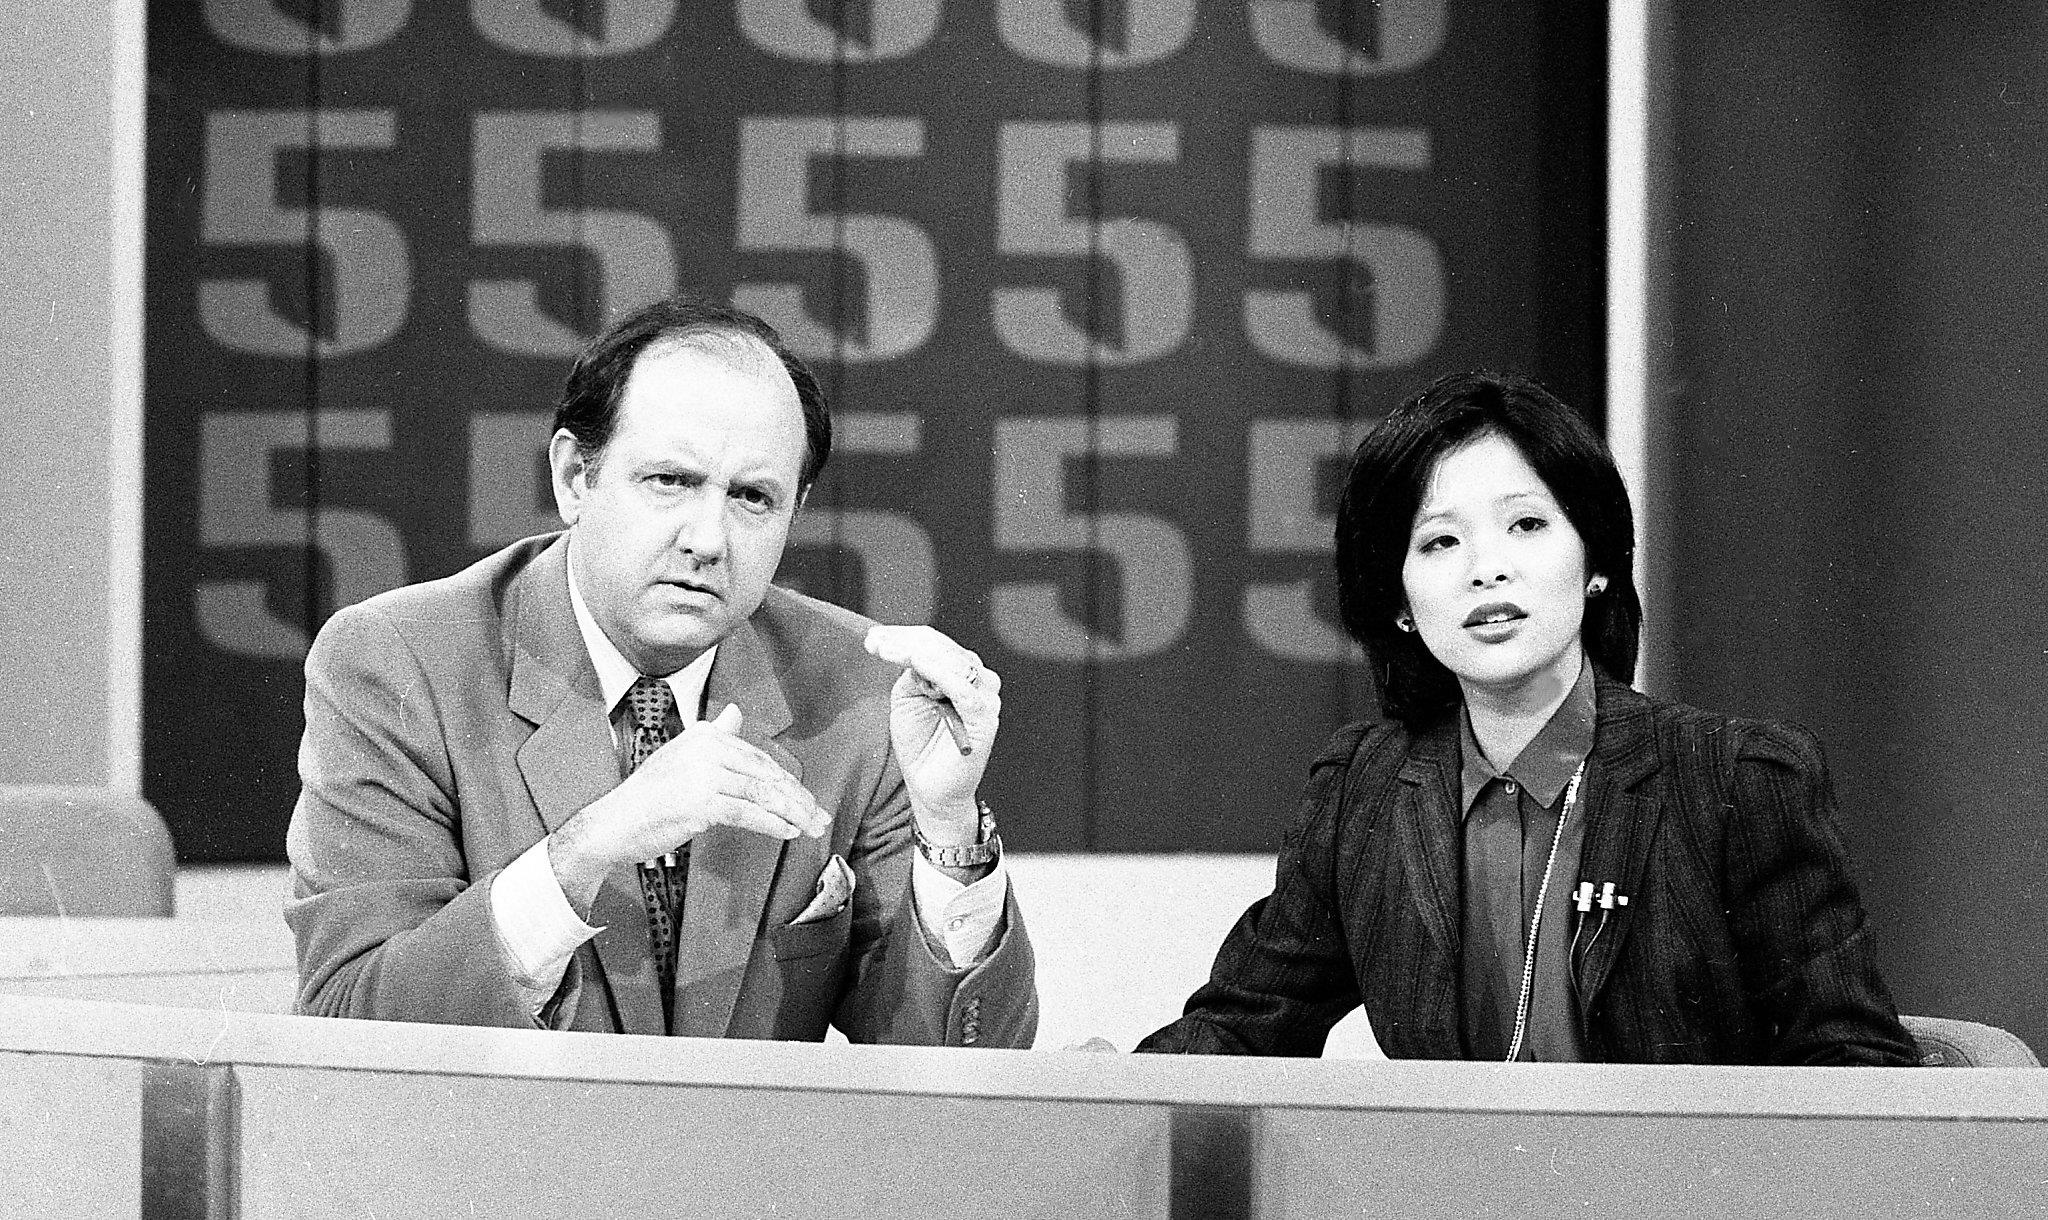 A tribute to Wendy Tokuda, Dave McElhatton and the golden age of TV news -  SFChronicle.com